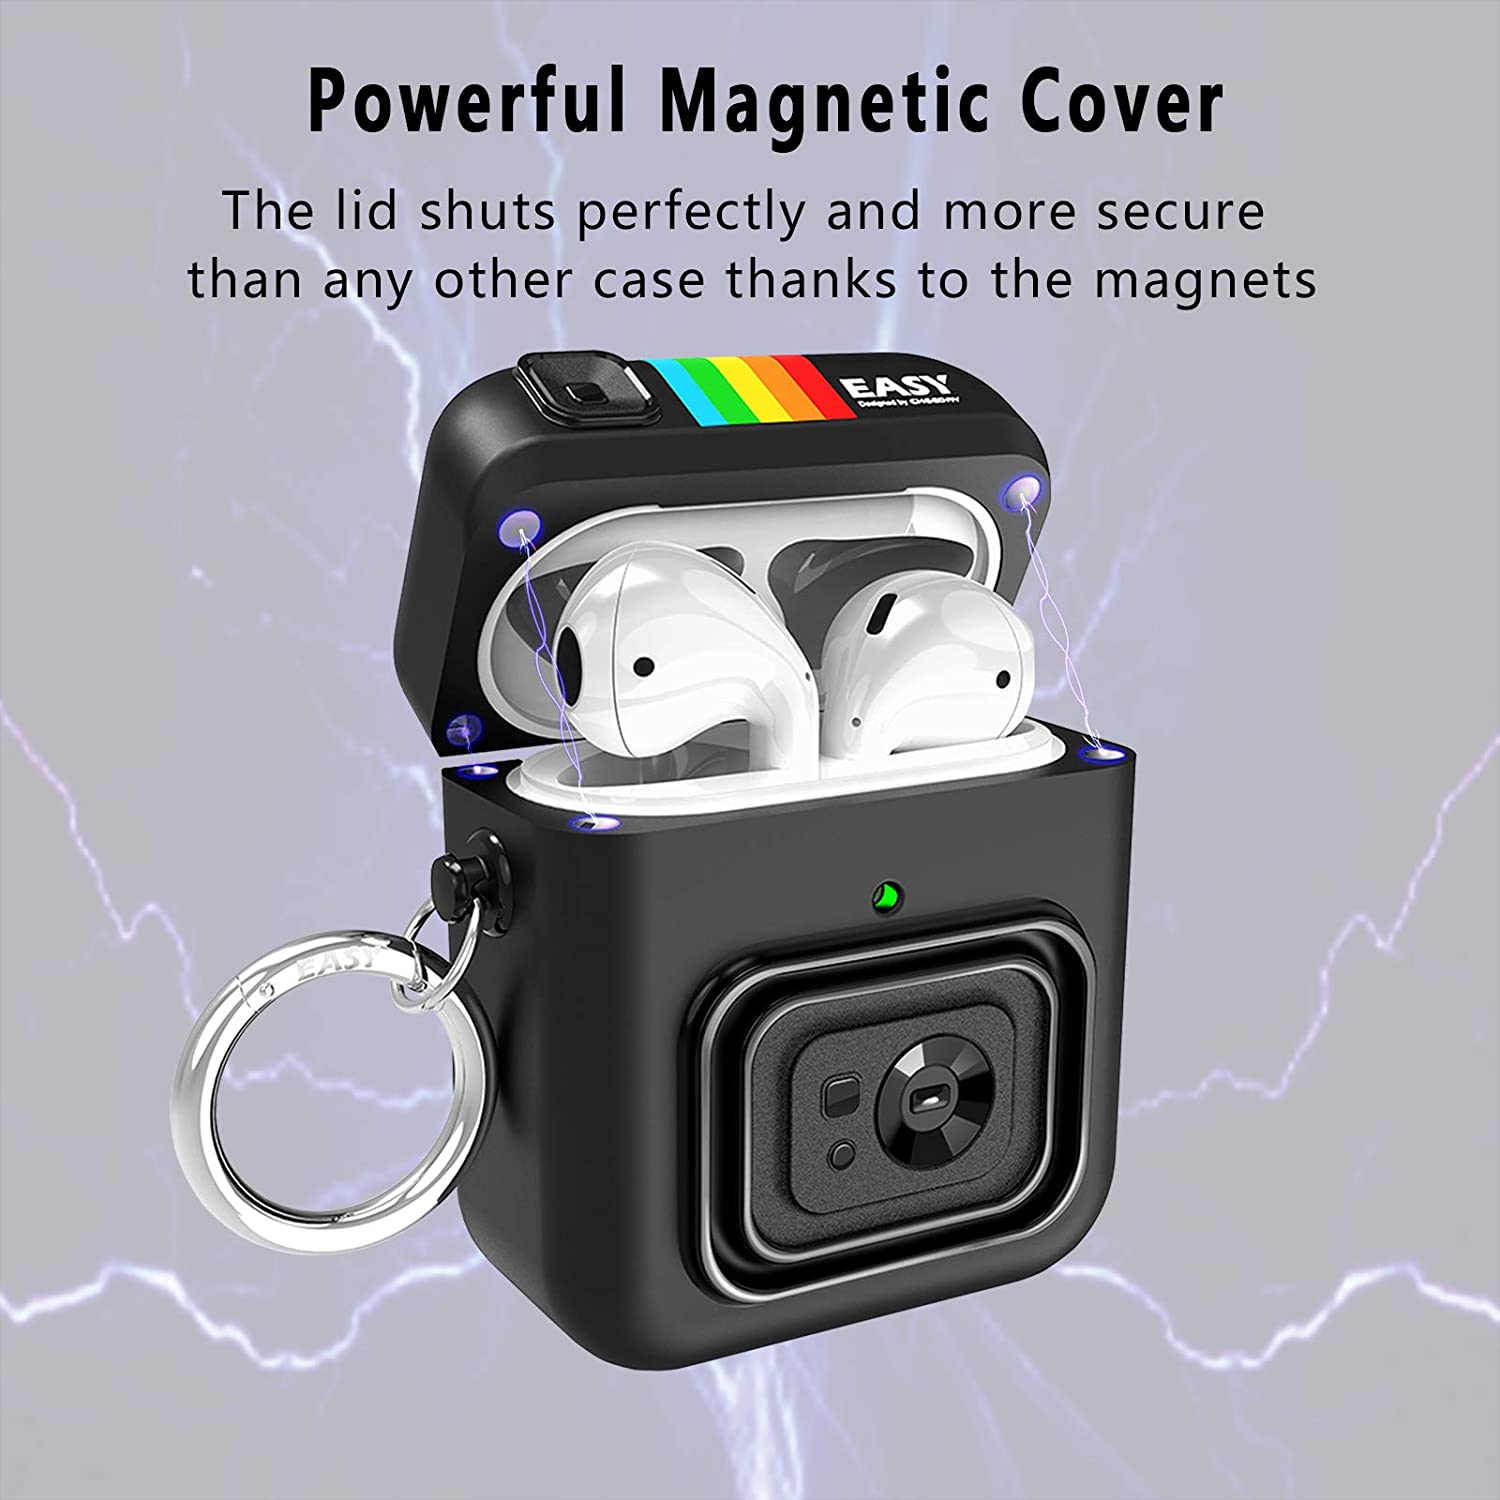 Magnetic Cover for Airpods Pro Case Cute Cartoon Camera Design with Keychain Silicone Rugged ArmorFull-Body for AirPods 1 2 Case - 200001619 Find Epic Store